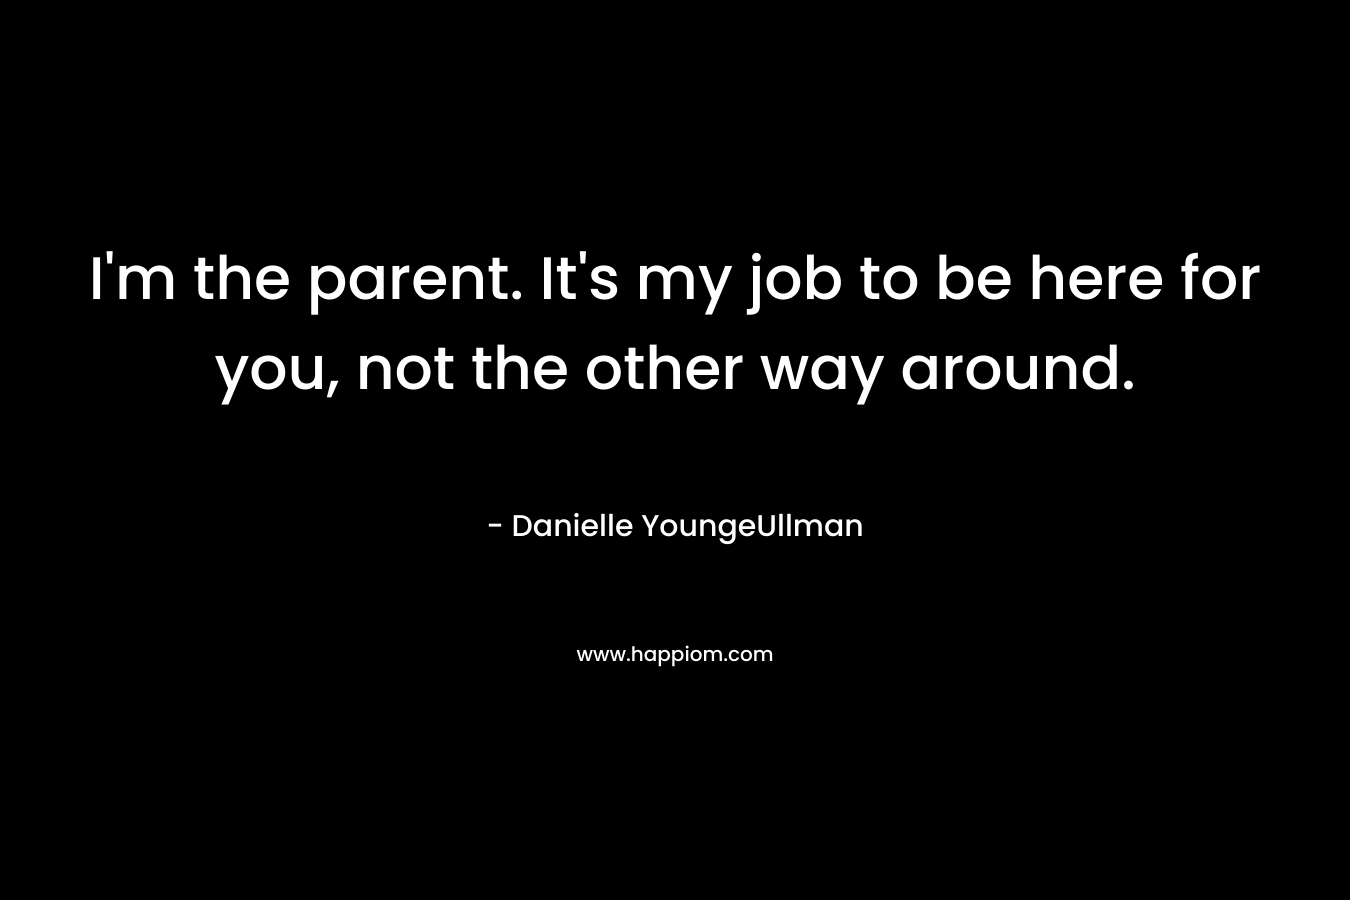 I'm the parent. It's my job to be here for you, not the other way around.